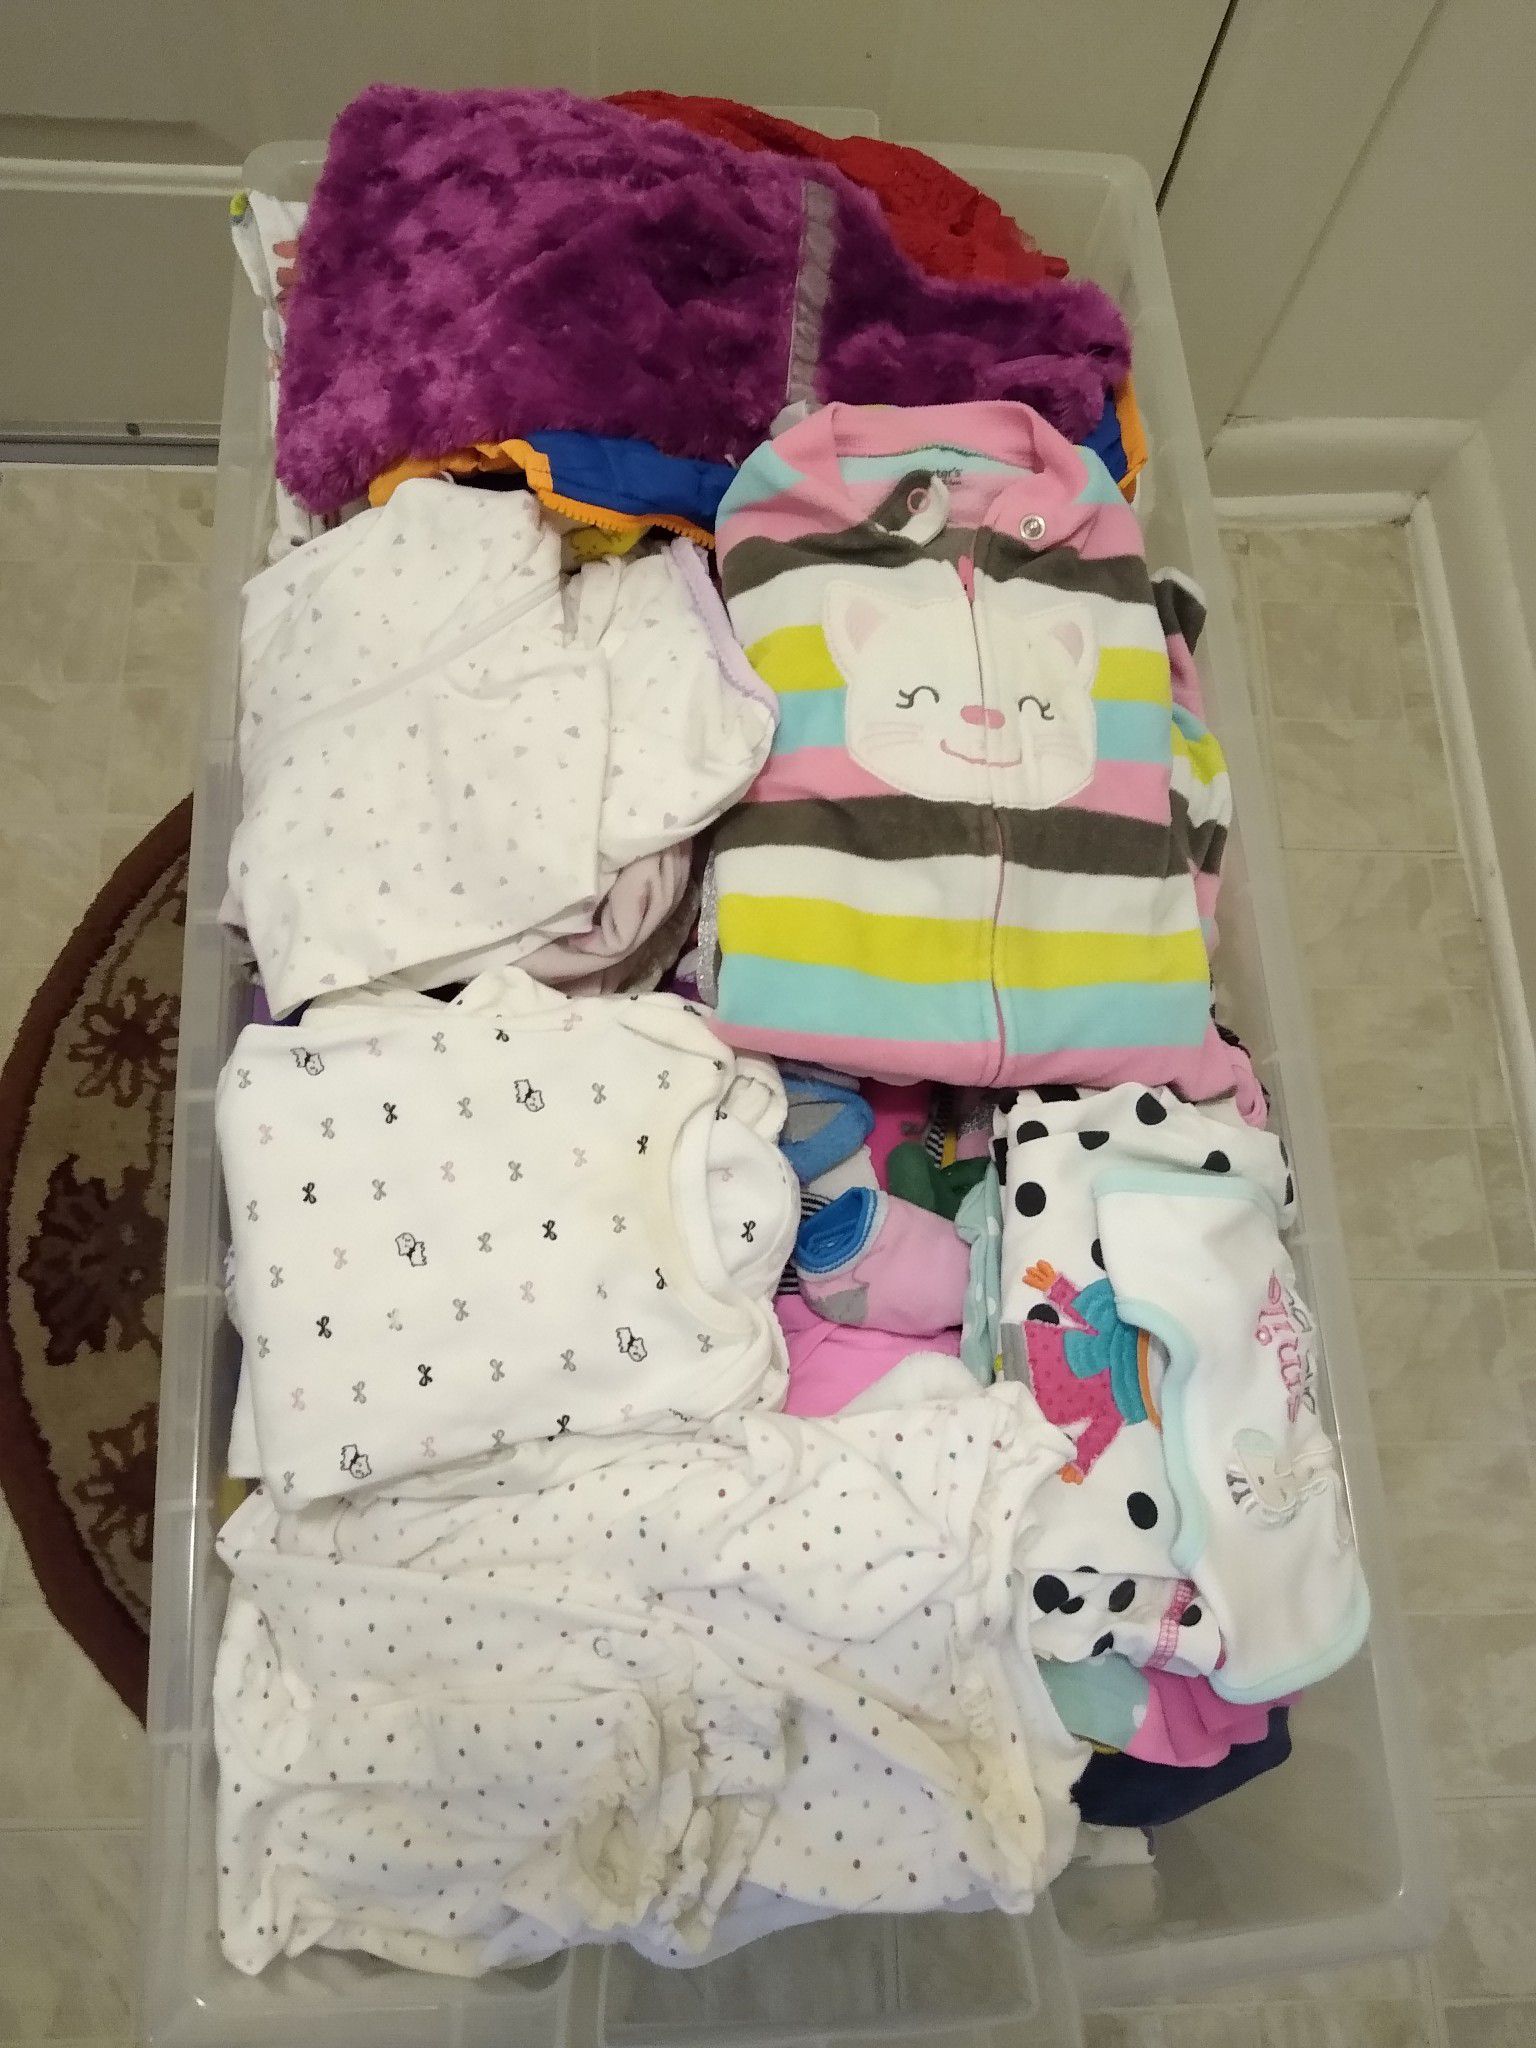 Baby clothes fifty cents each I have one big container